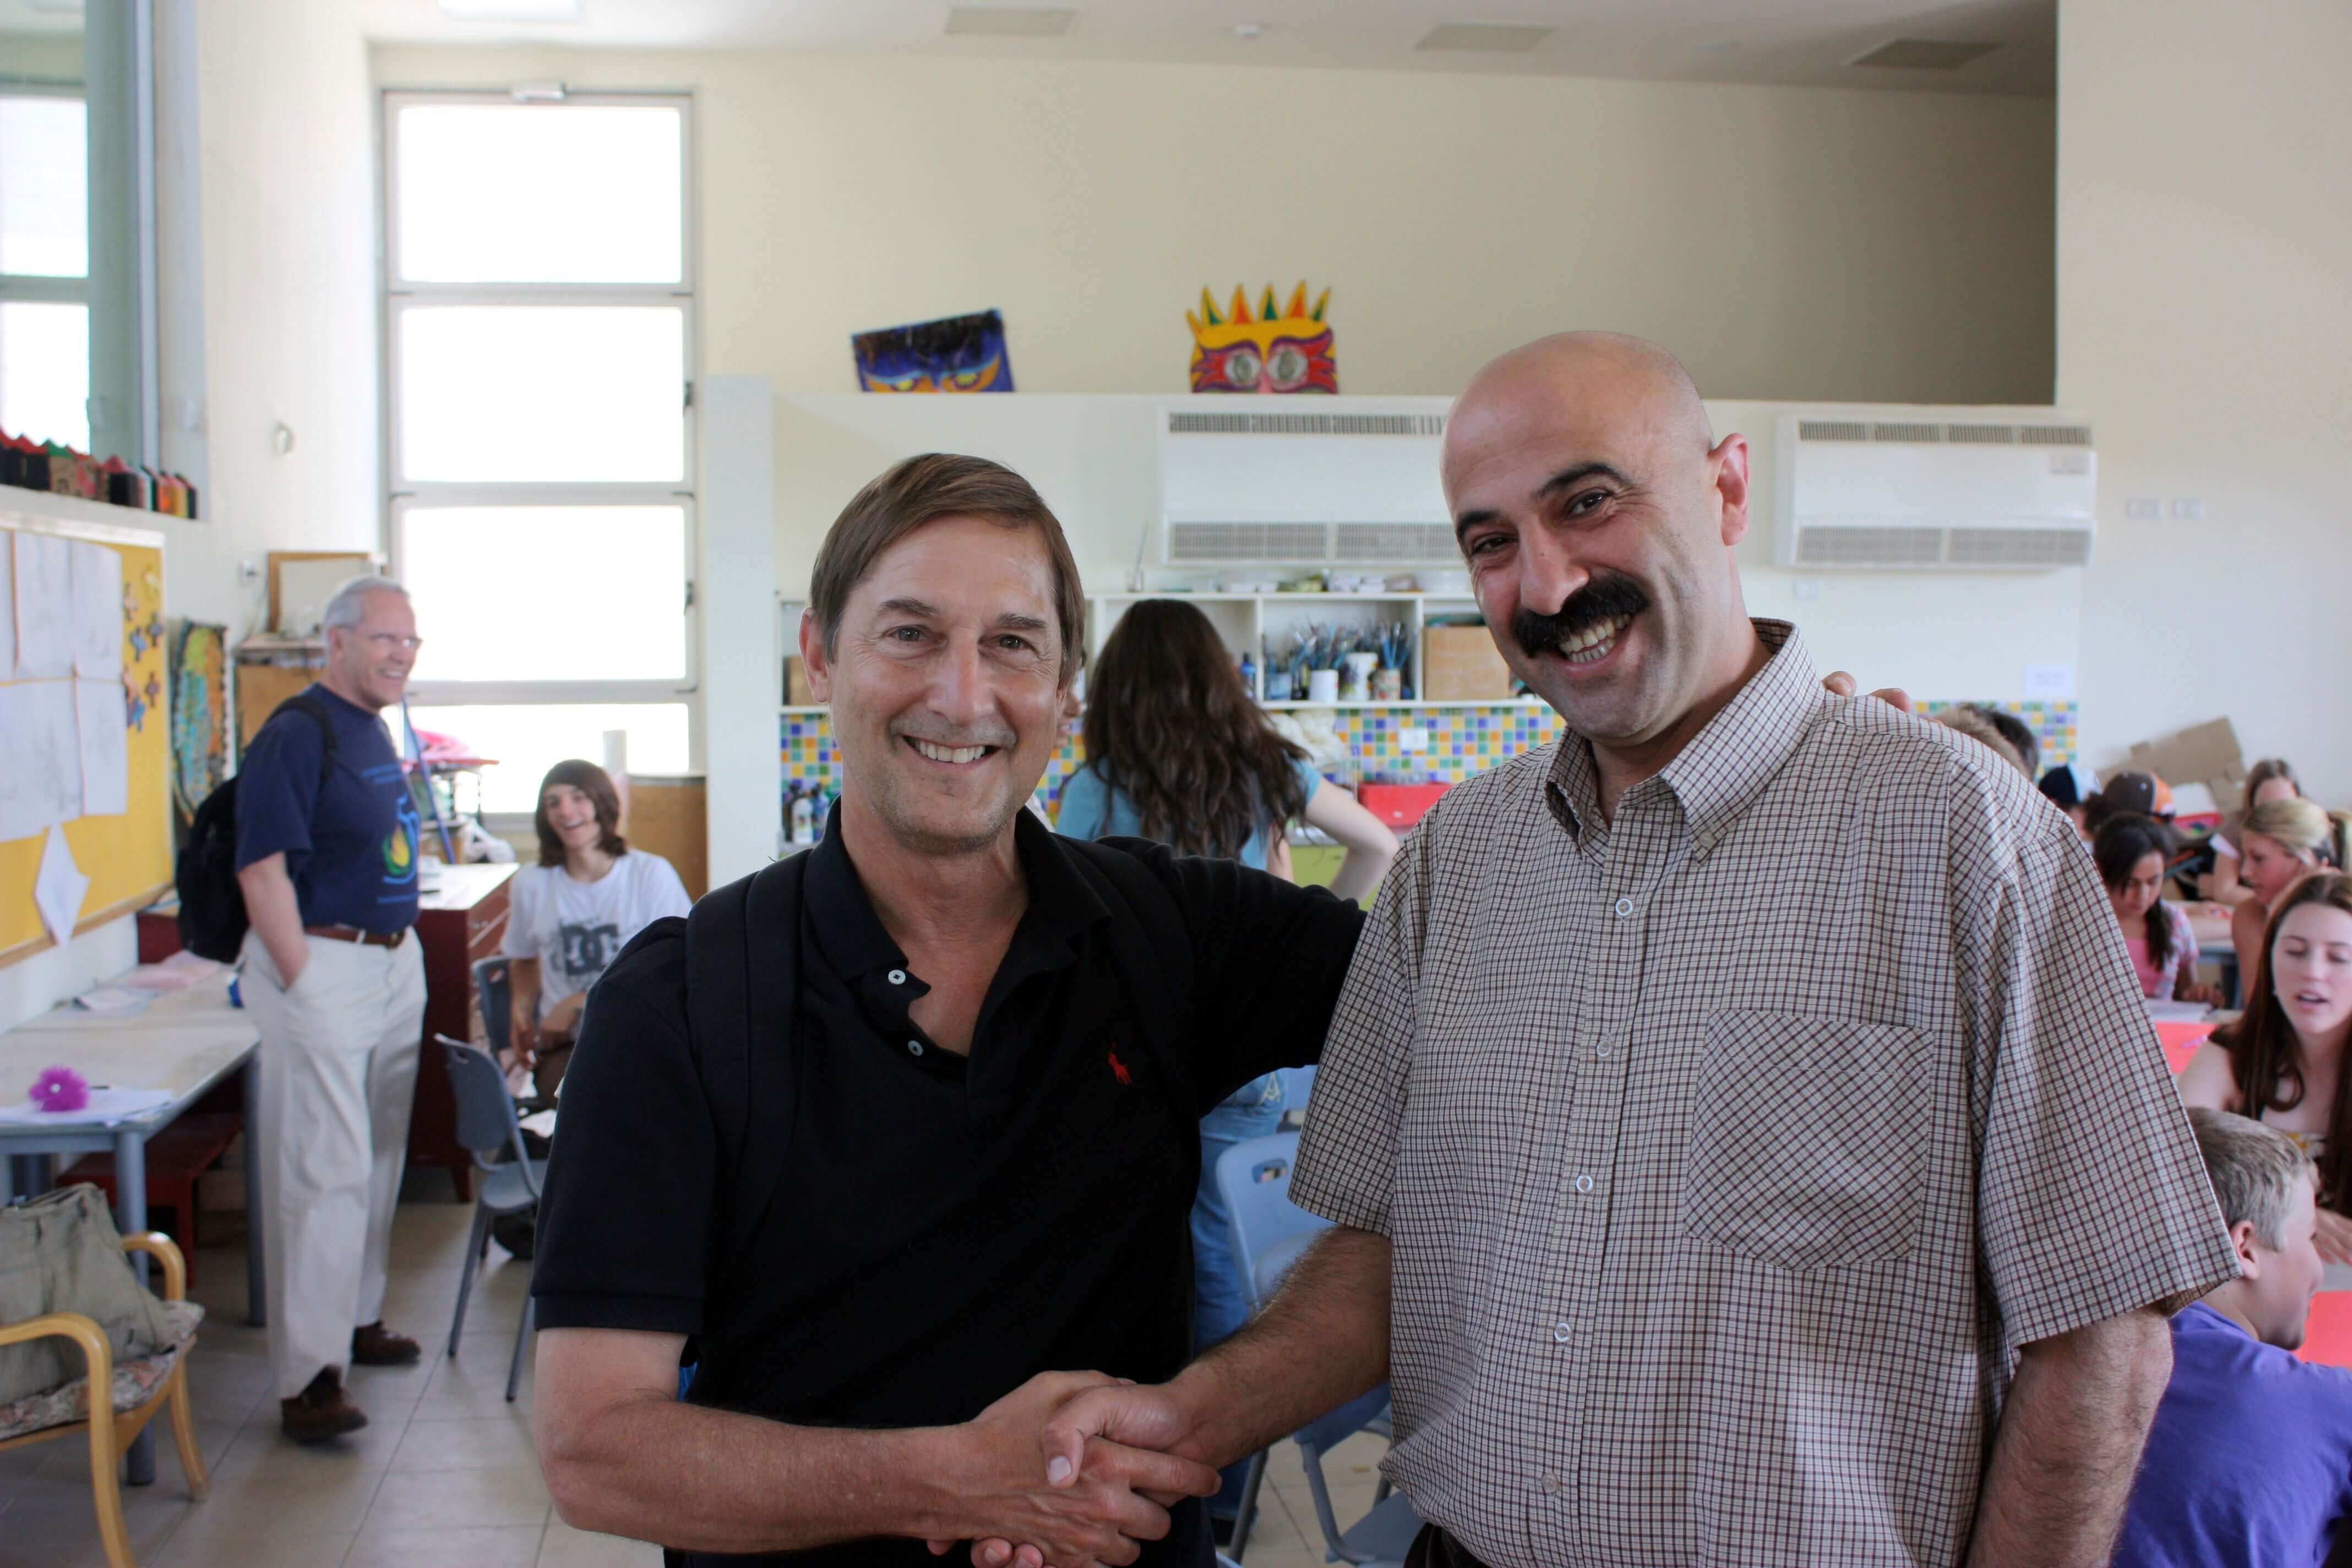 Dr. Grauer with an Israeli educator